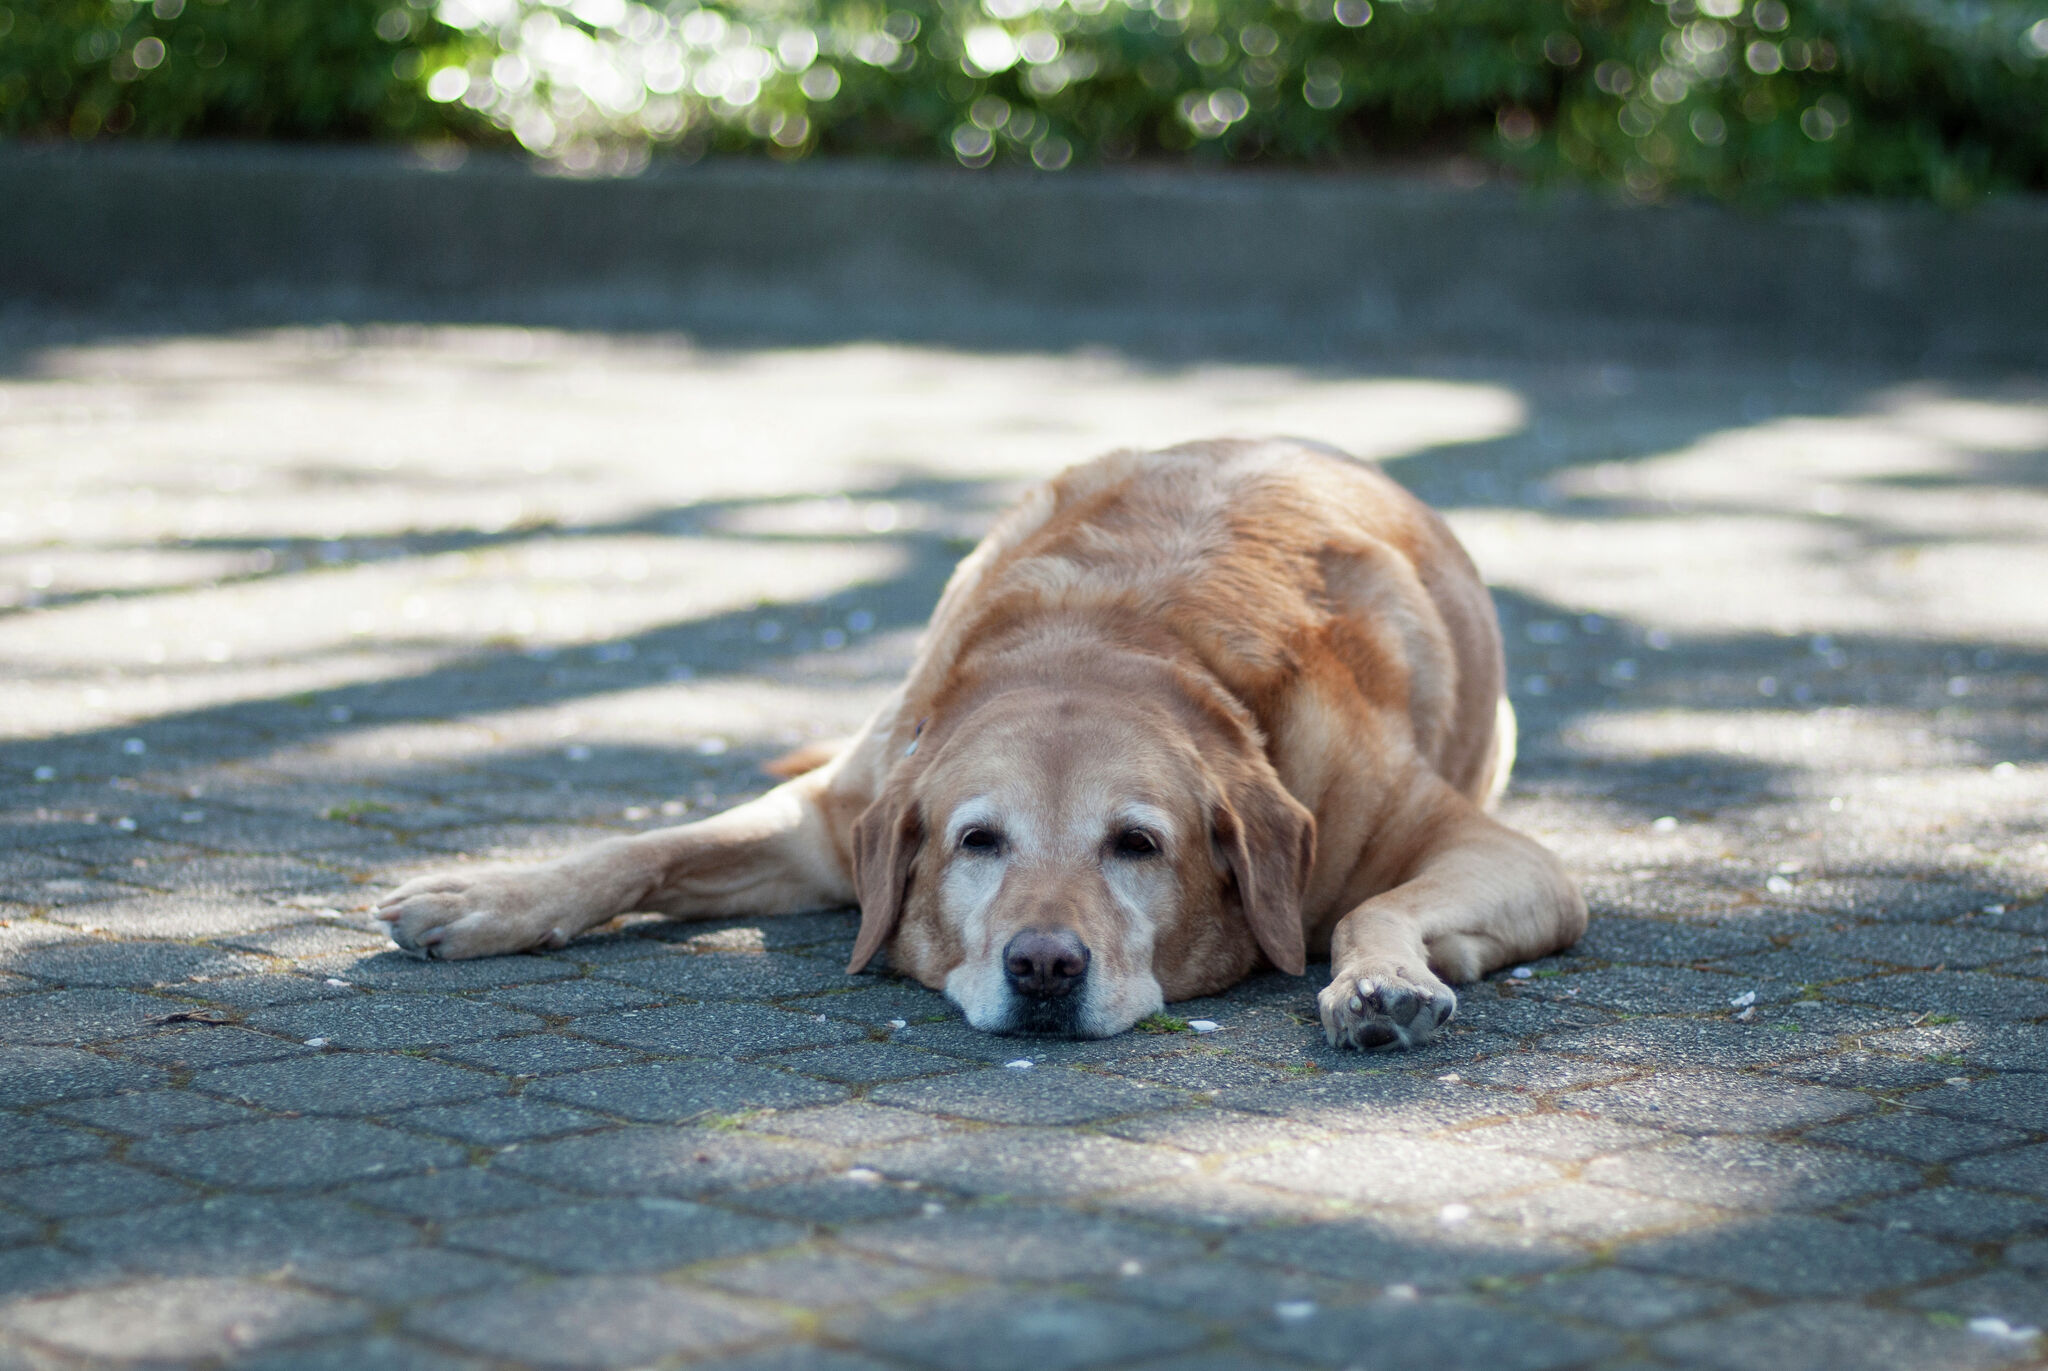 Why do dogs lie in the sun when it's hot?